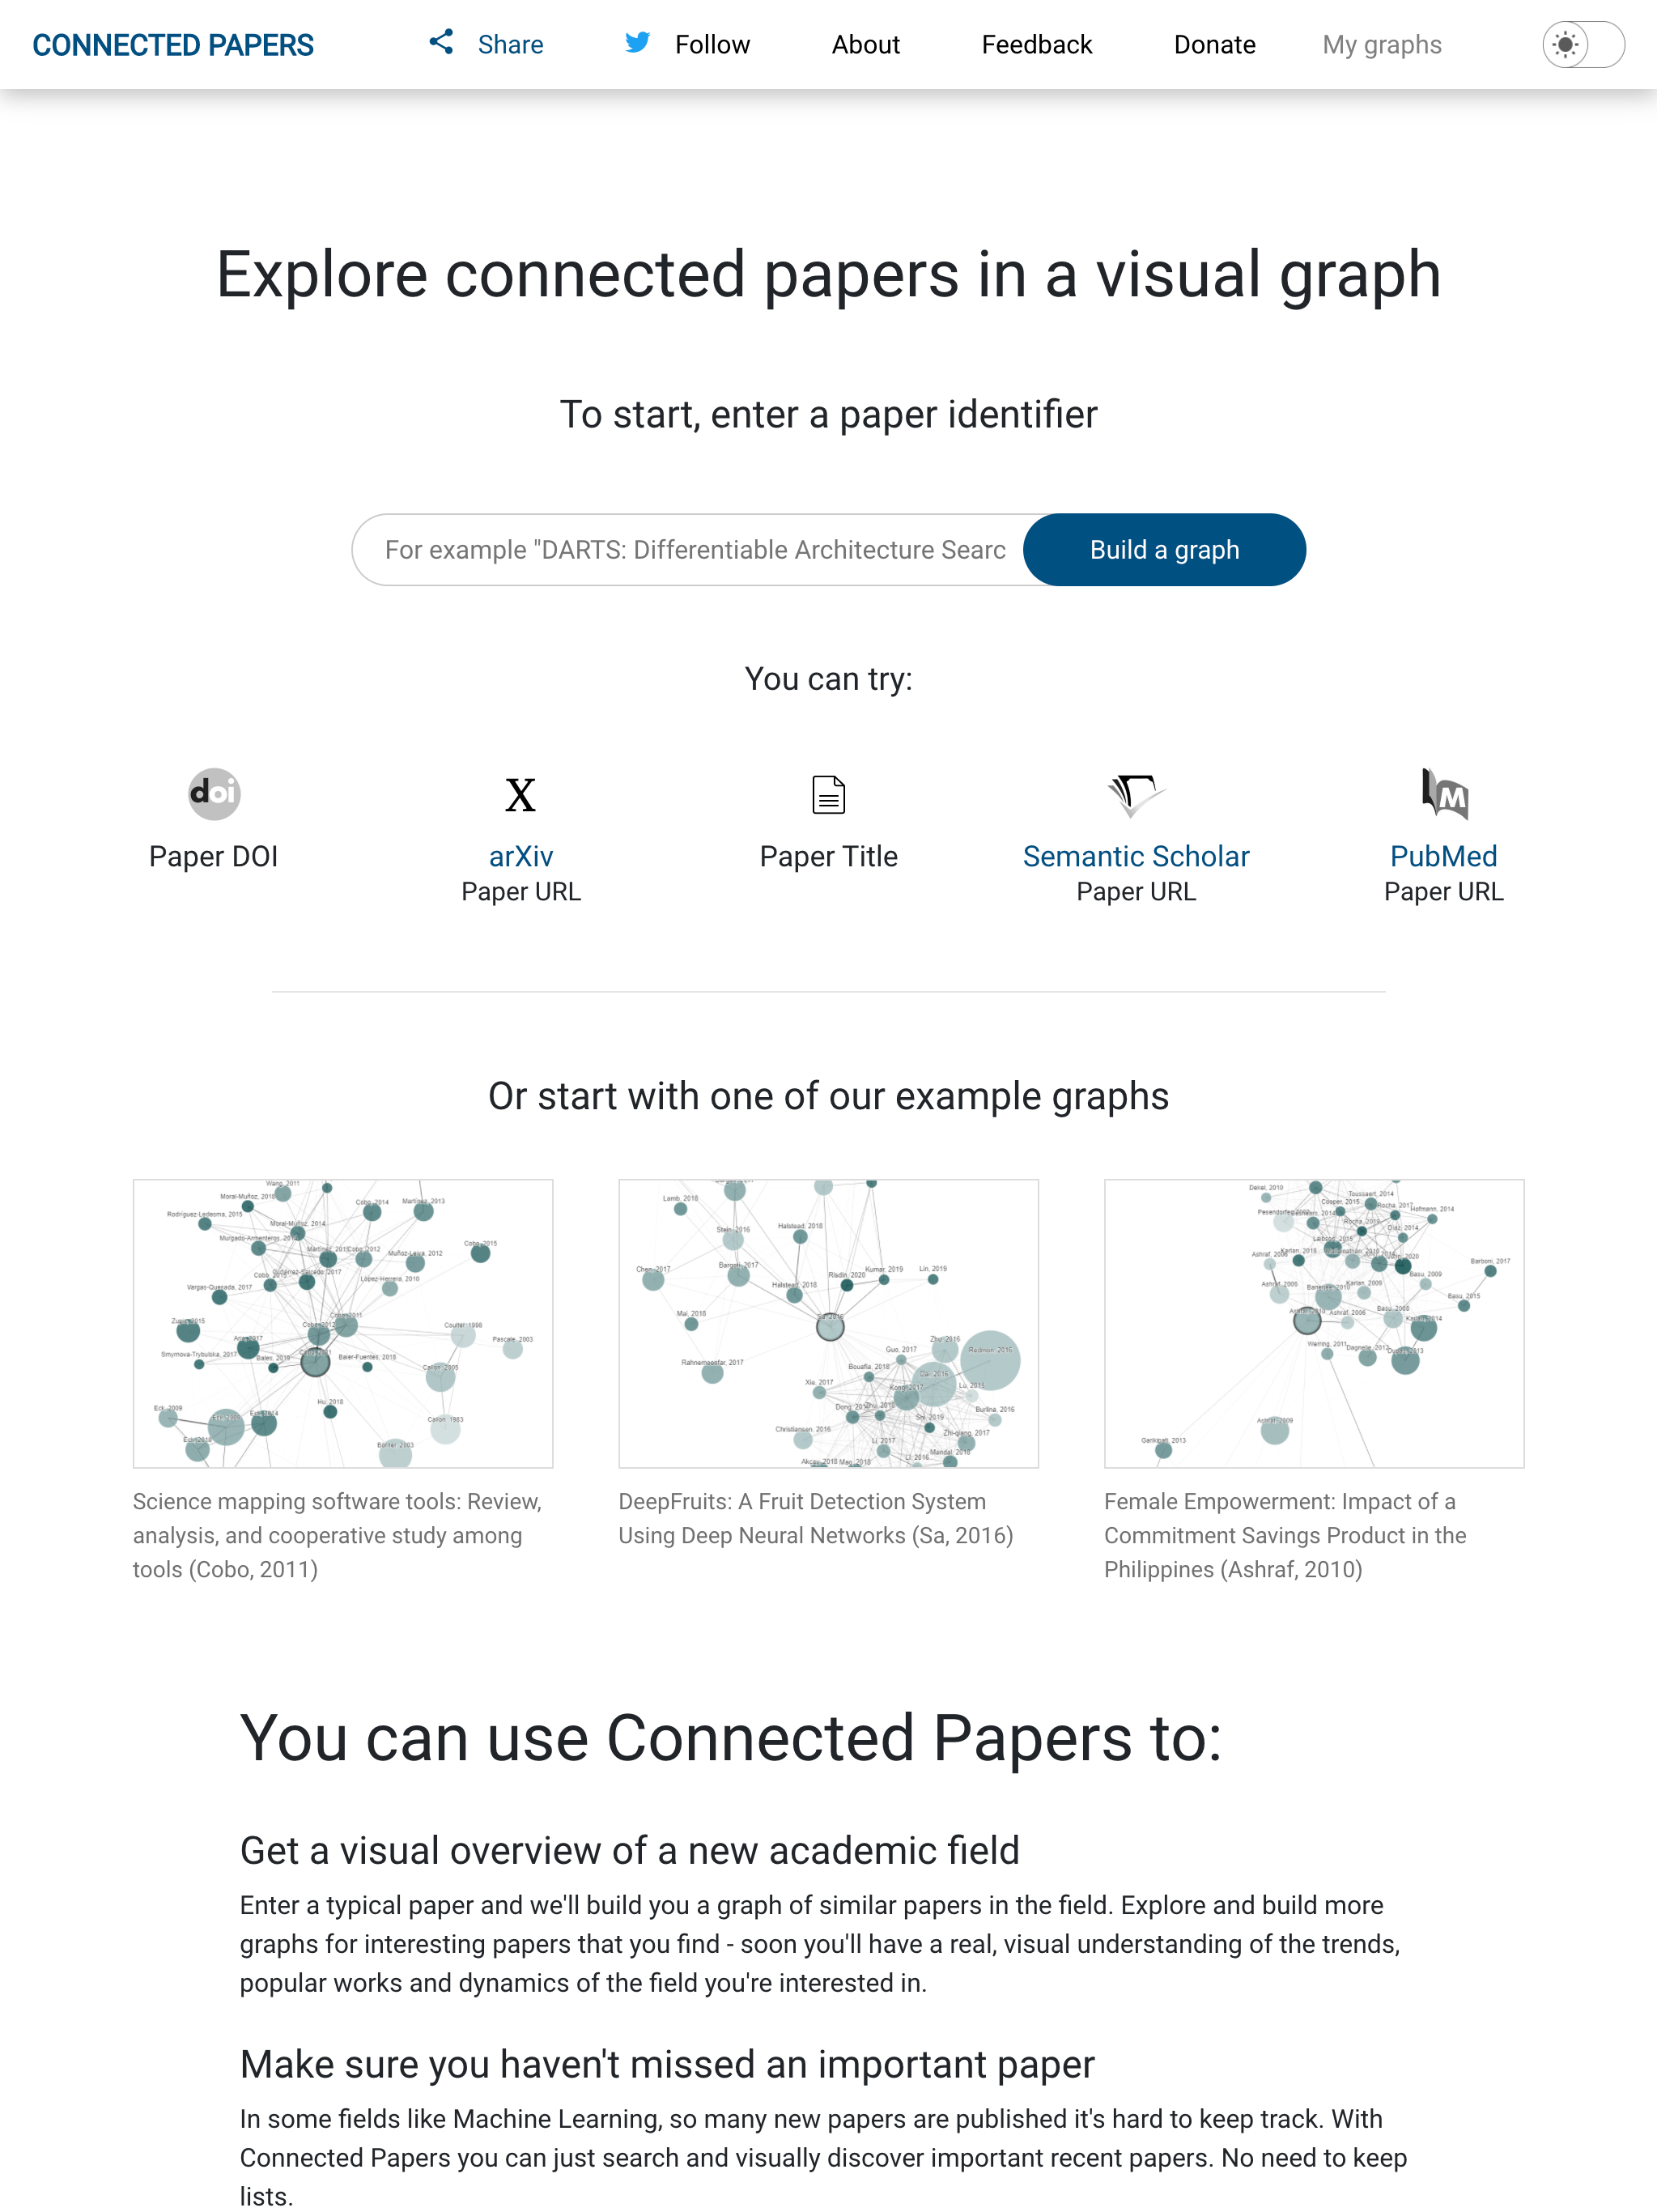 Connected Papers